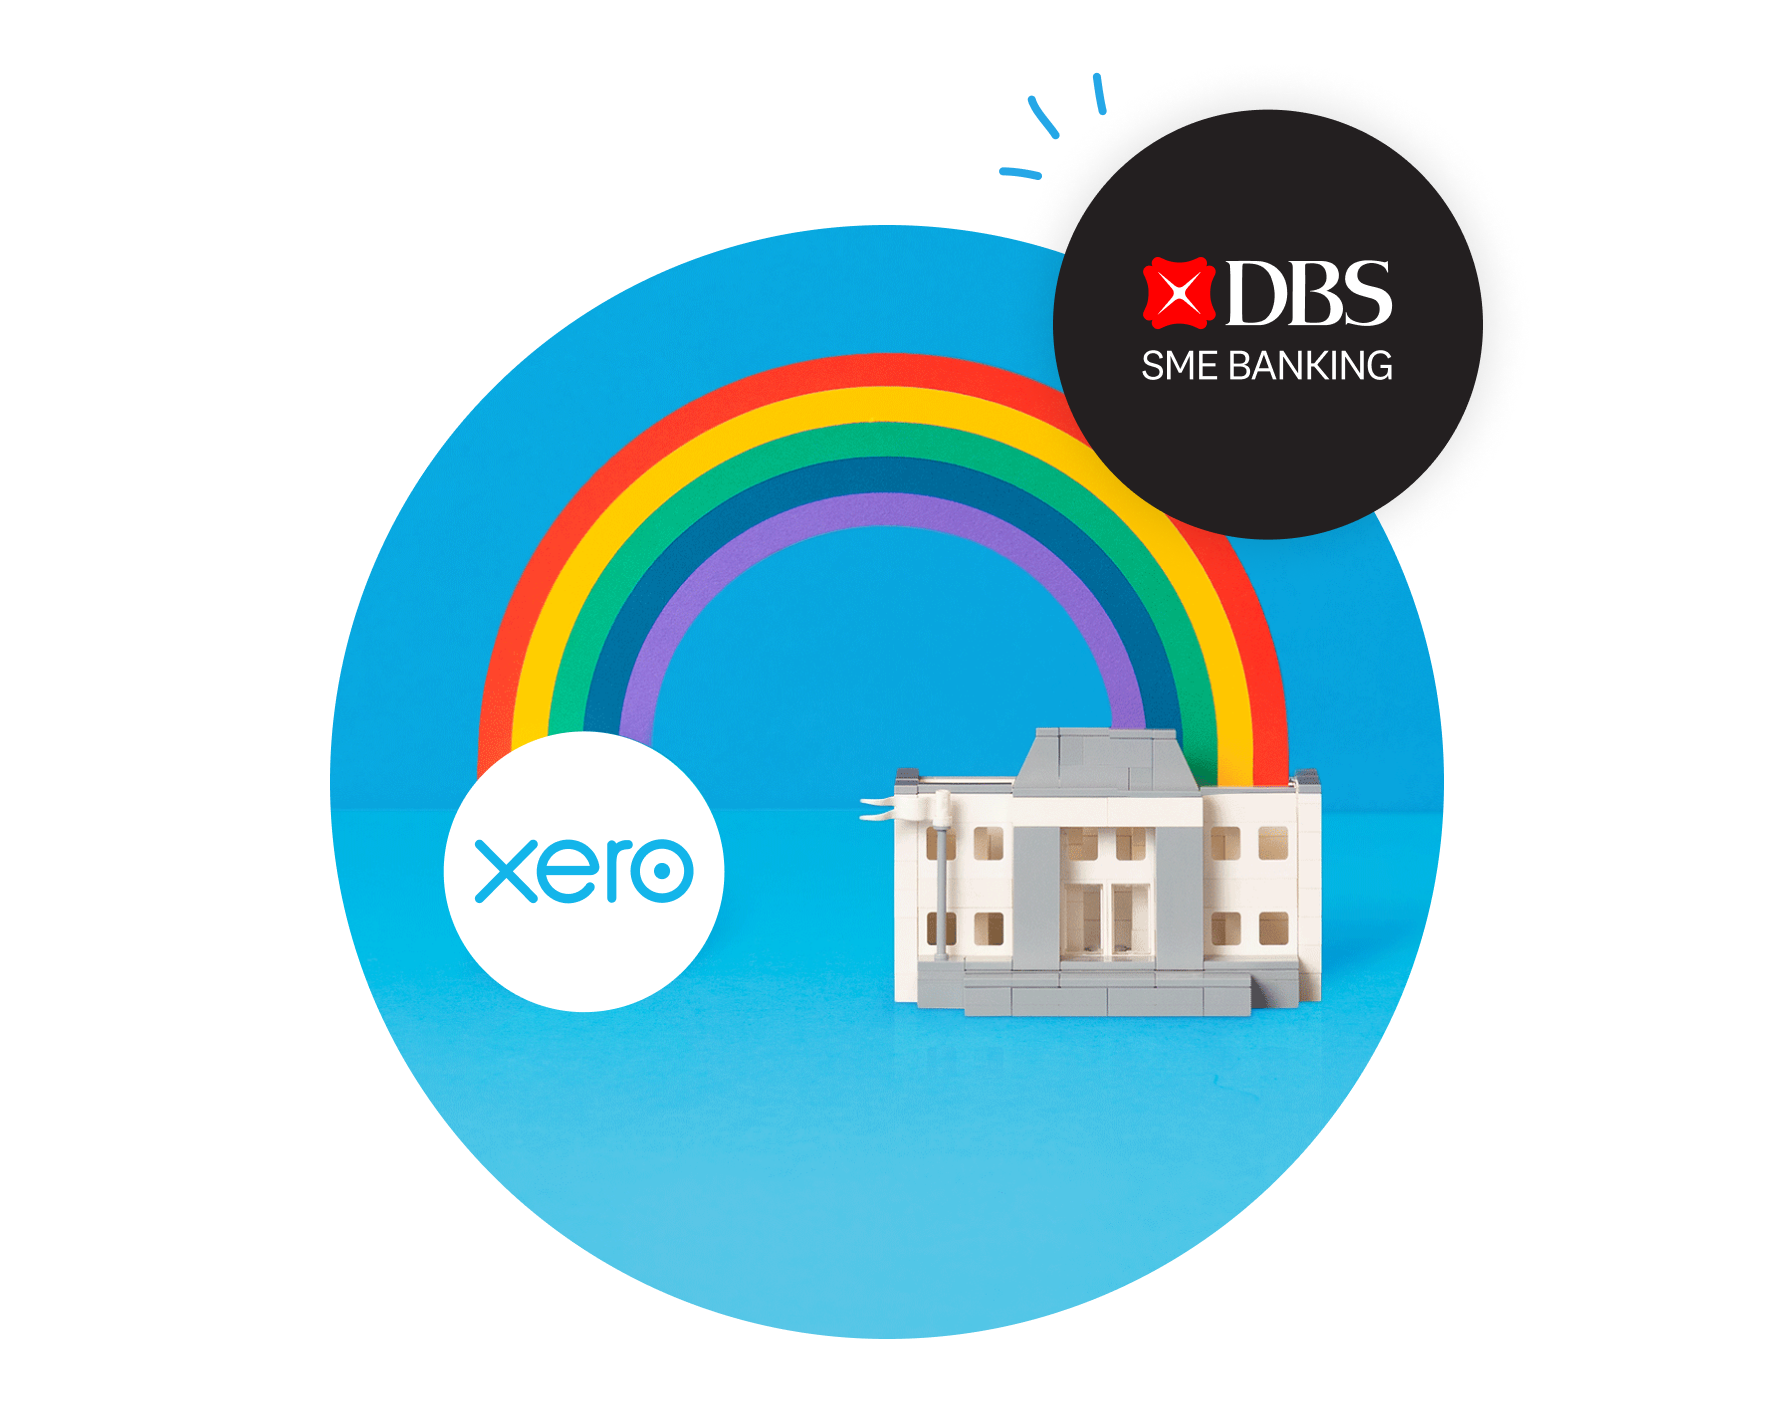 Rainbow connecting Xero and DBS SME Banking